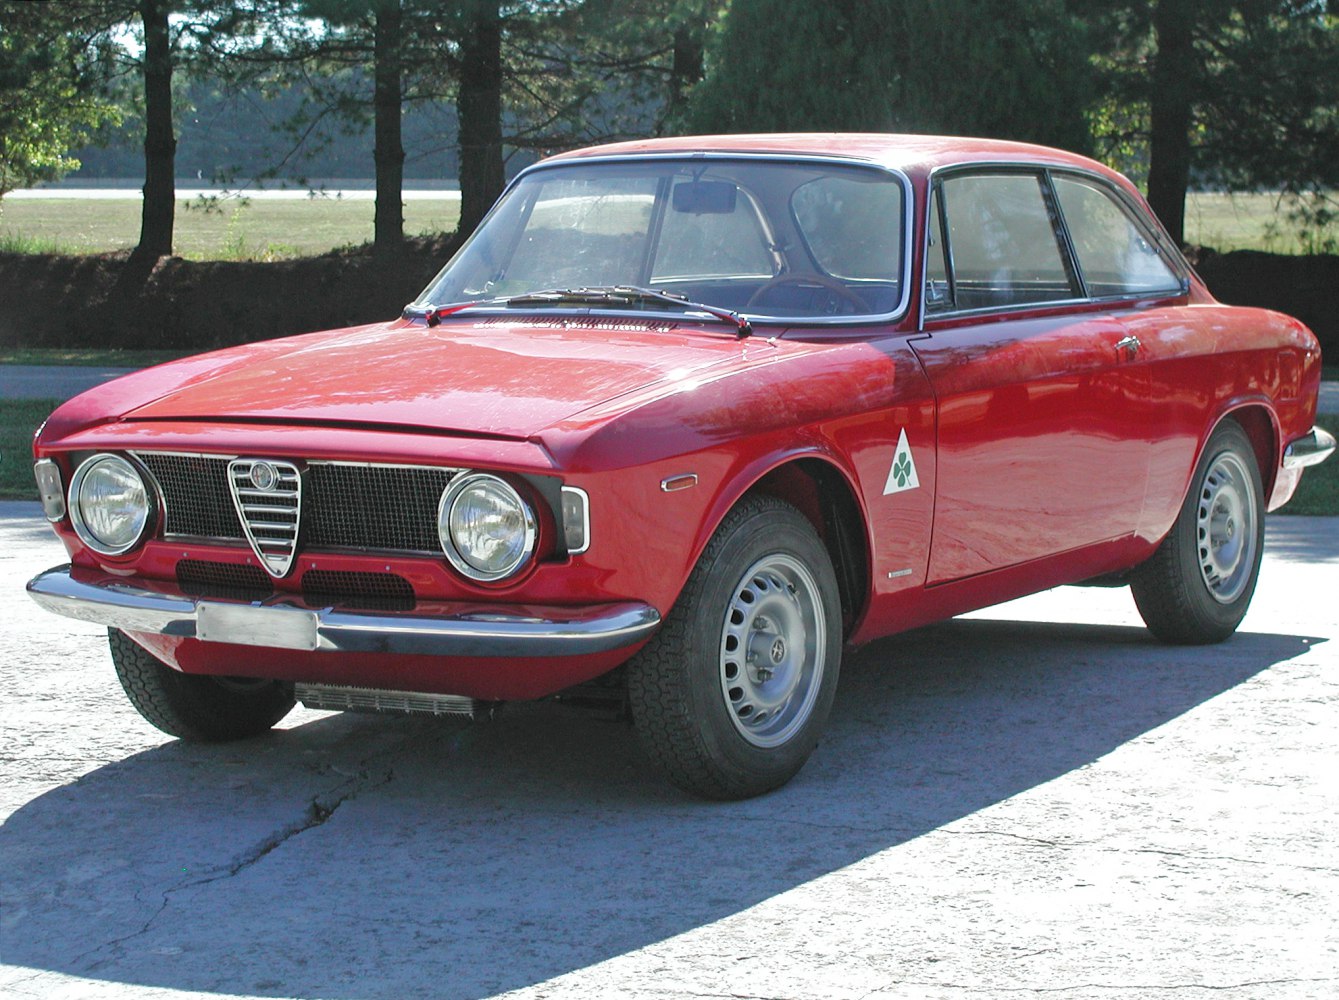 https://totalrenting.es/wp-content/uploads/2022/10/alfa-romeo-gta-coupe-1968-1-3-junior-110-cv-coupe.png